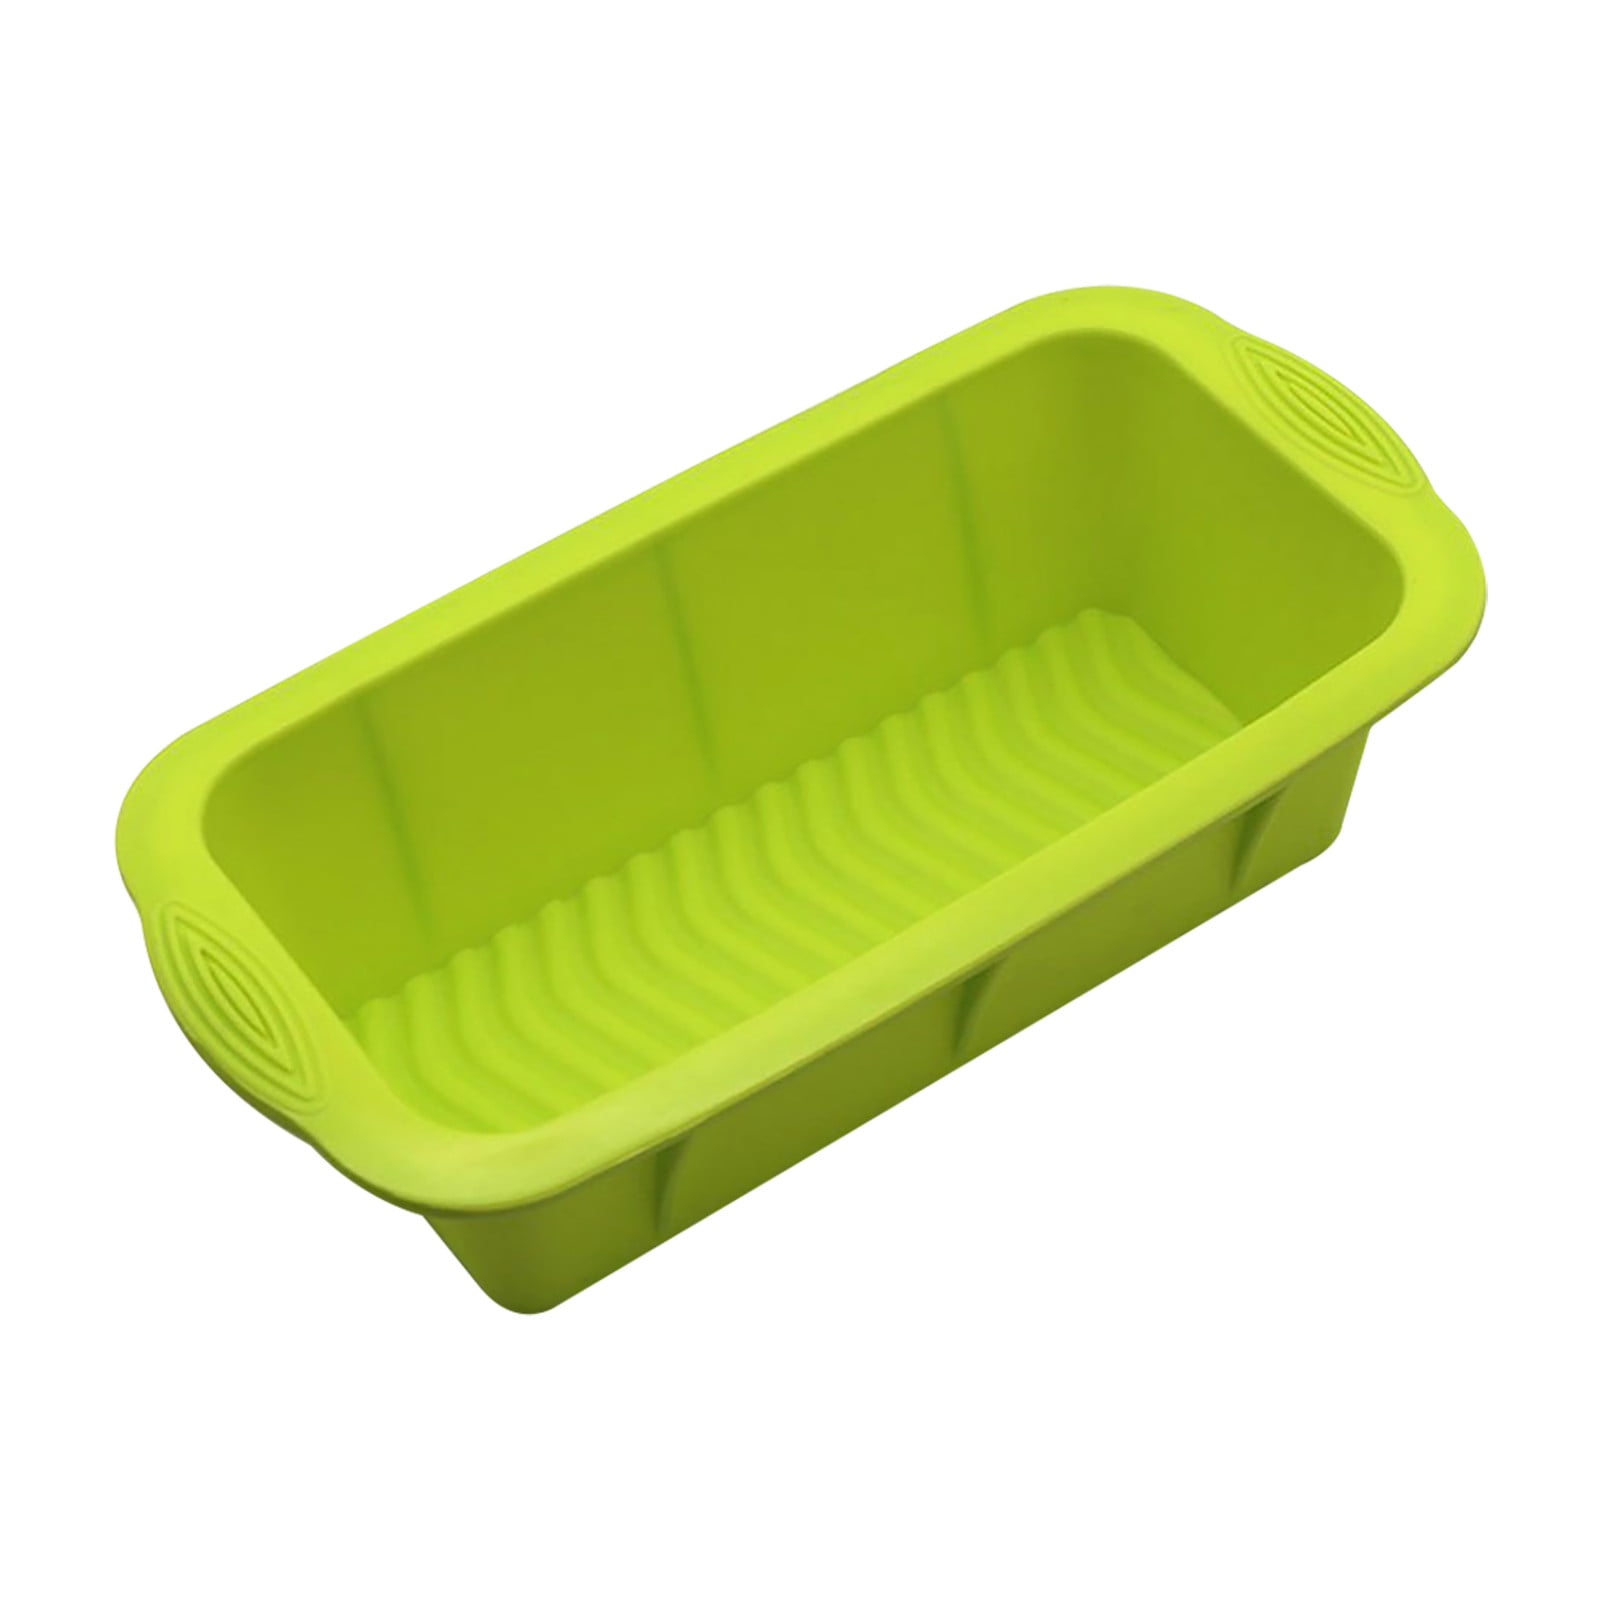 JH-089 Silicone Bread Loaf Pan - Holar